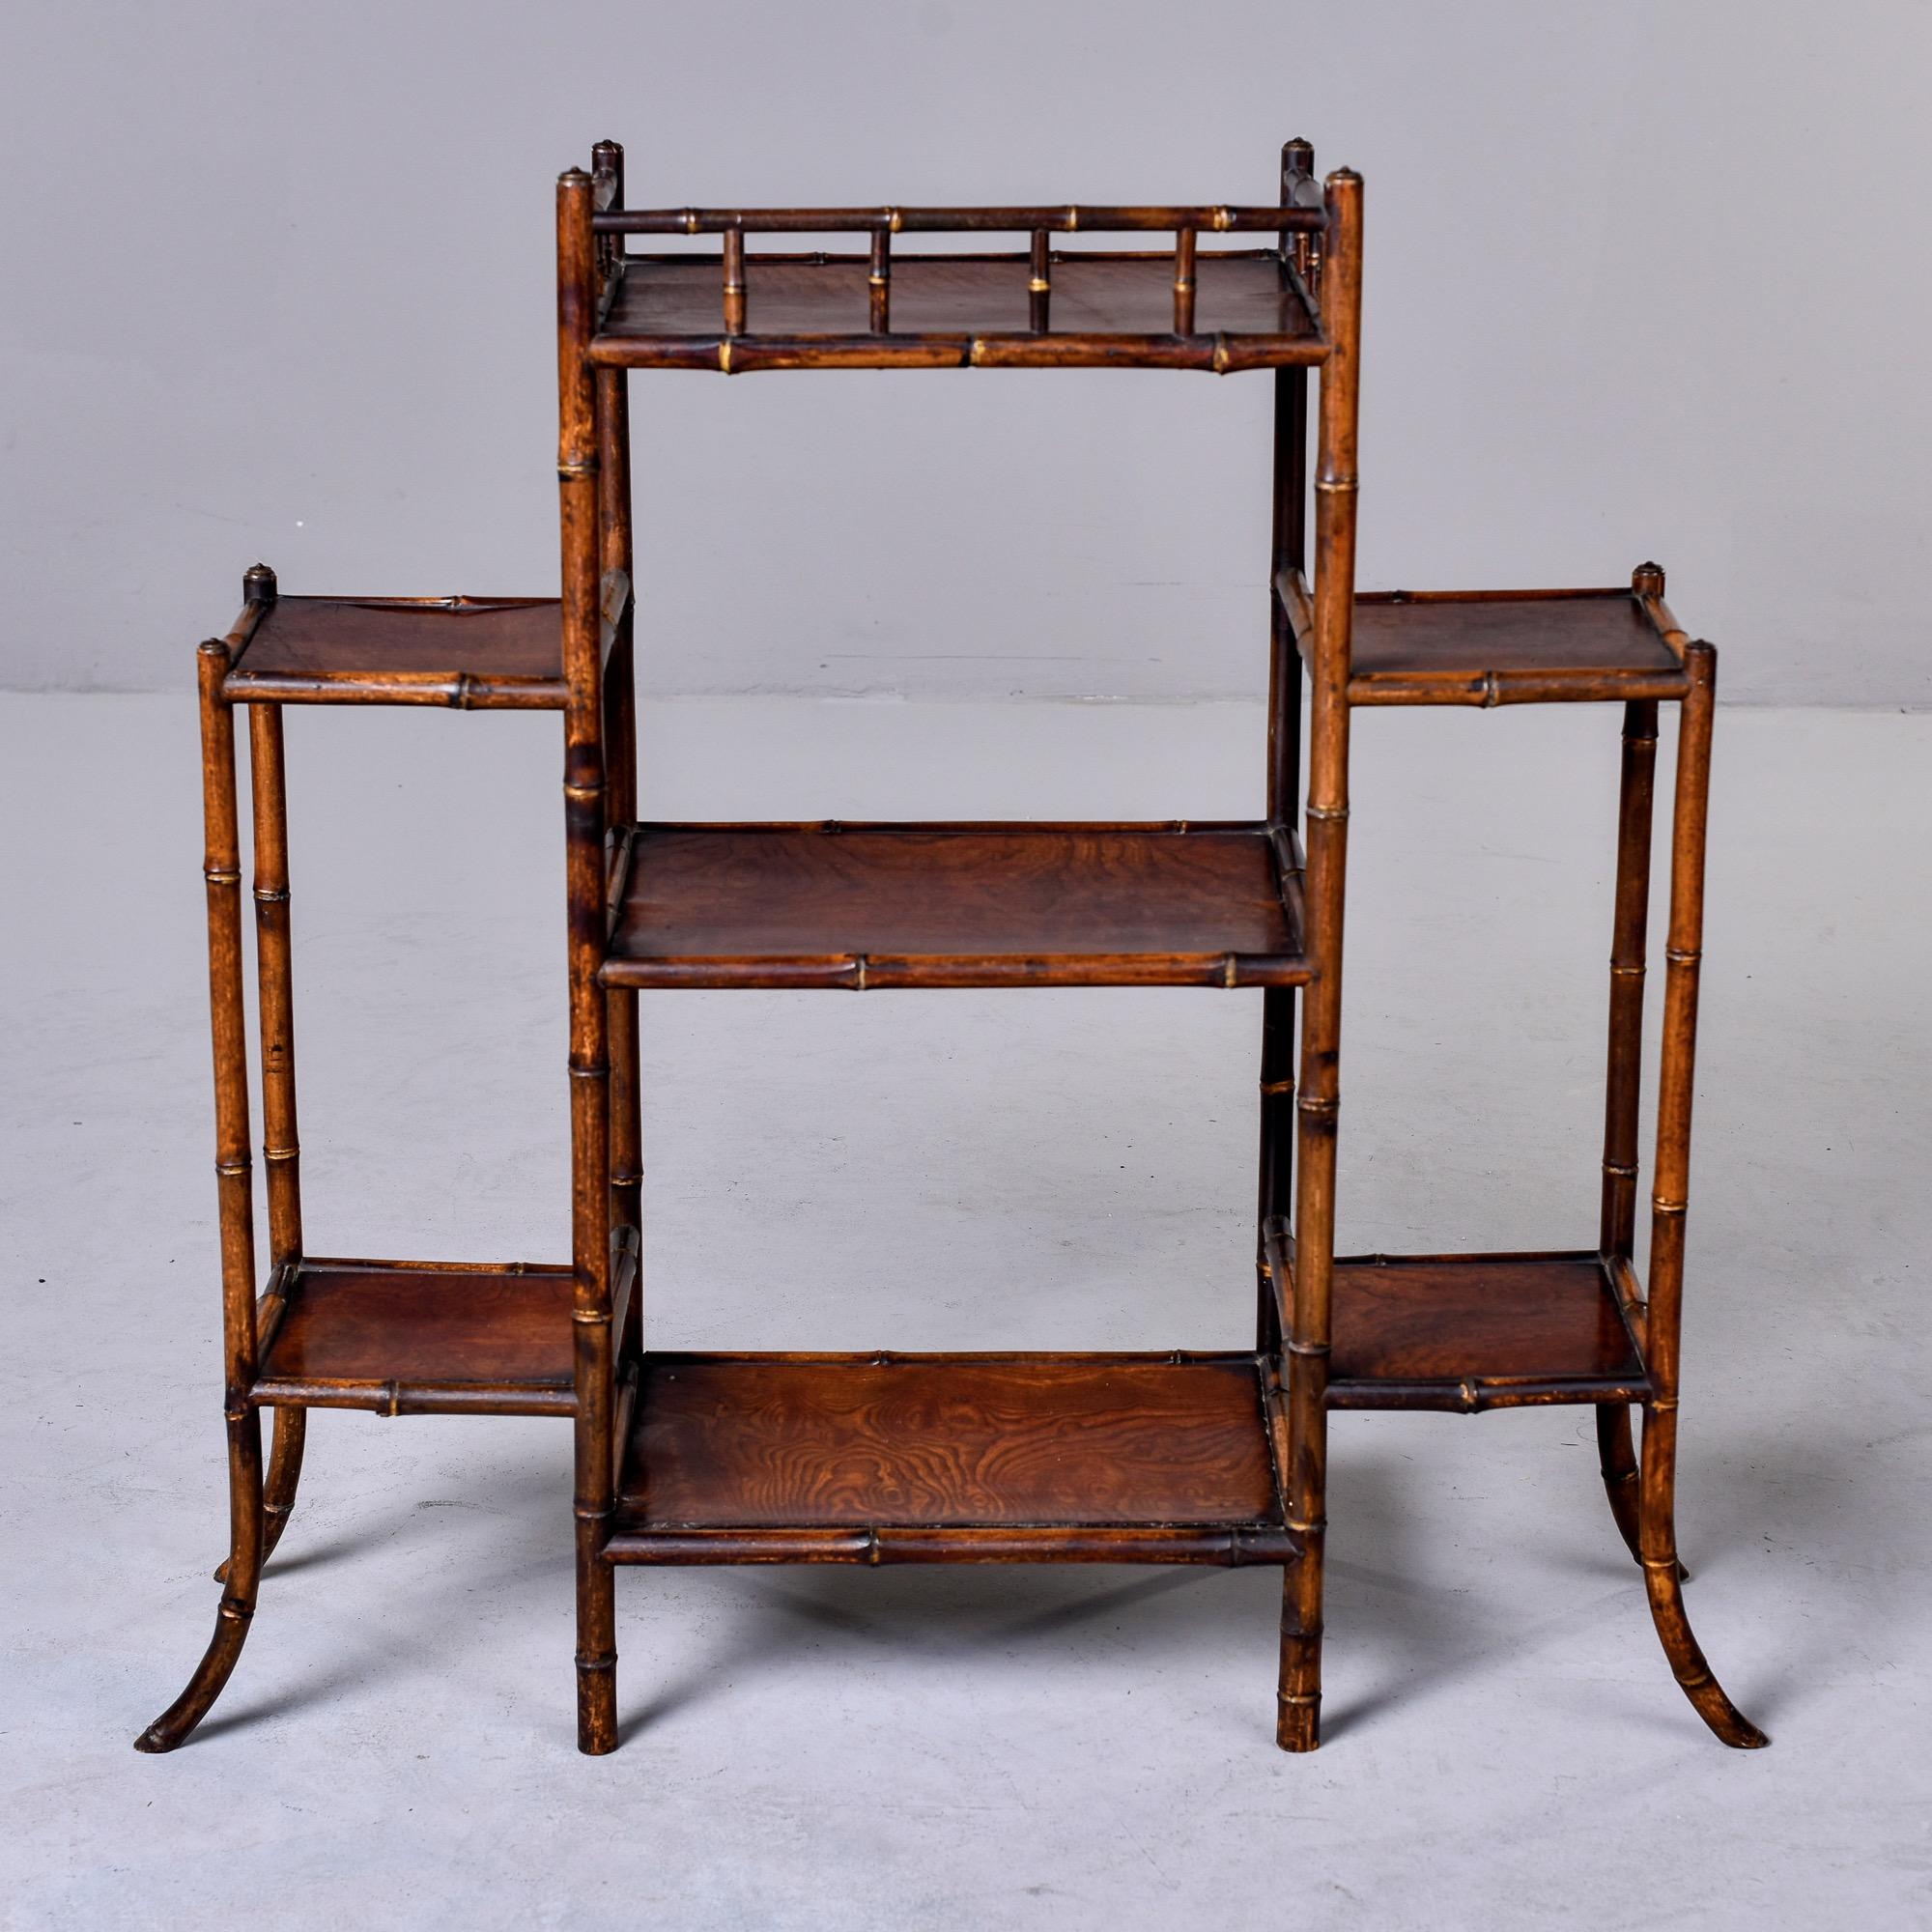 Early 20th C English Bamboo Etagere Plant Display Stand For Sale 4